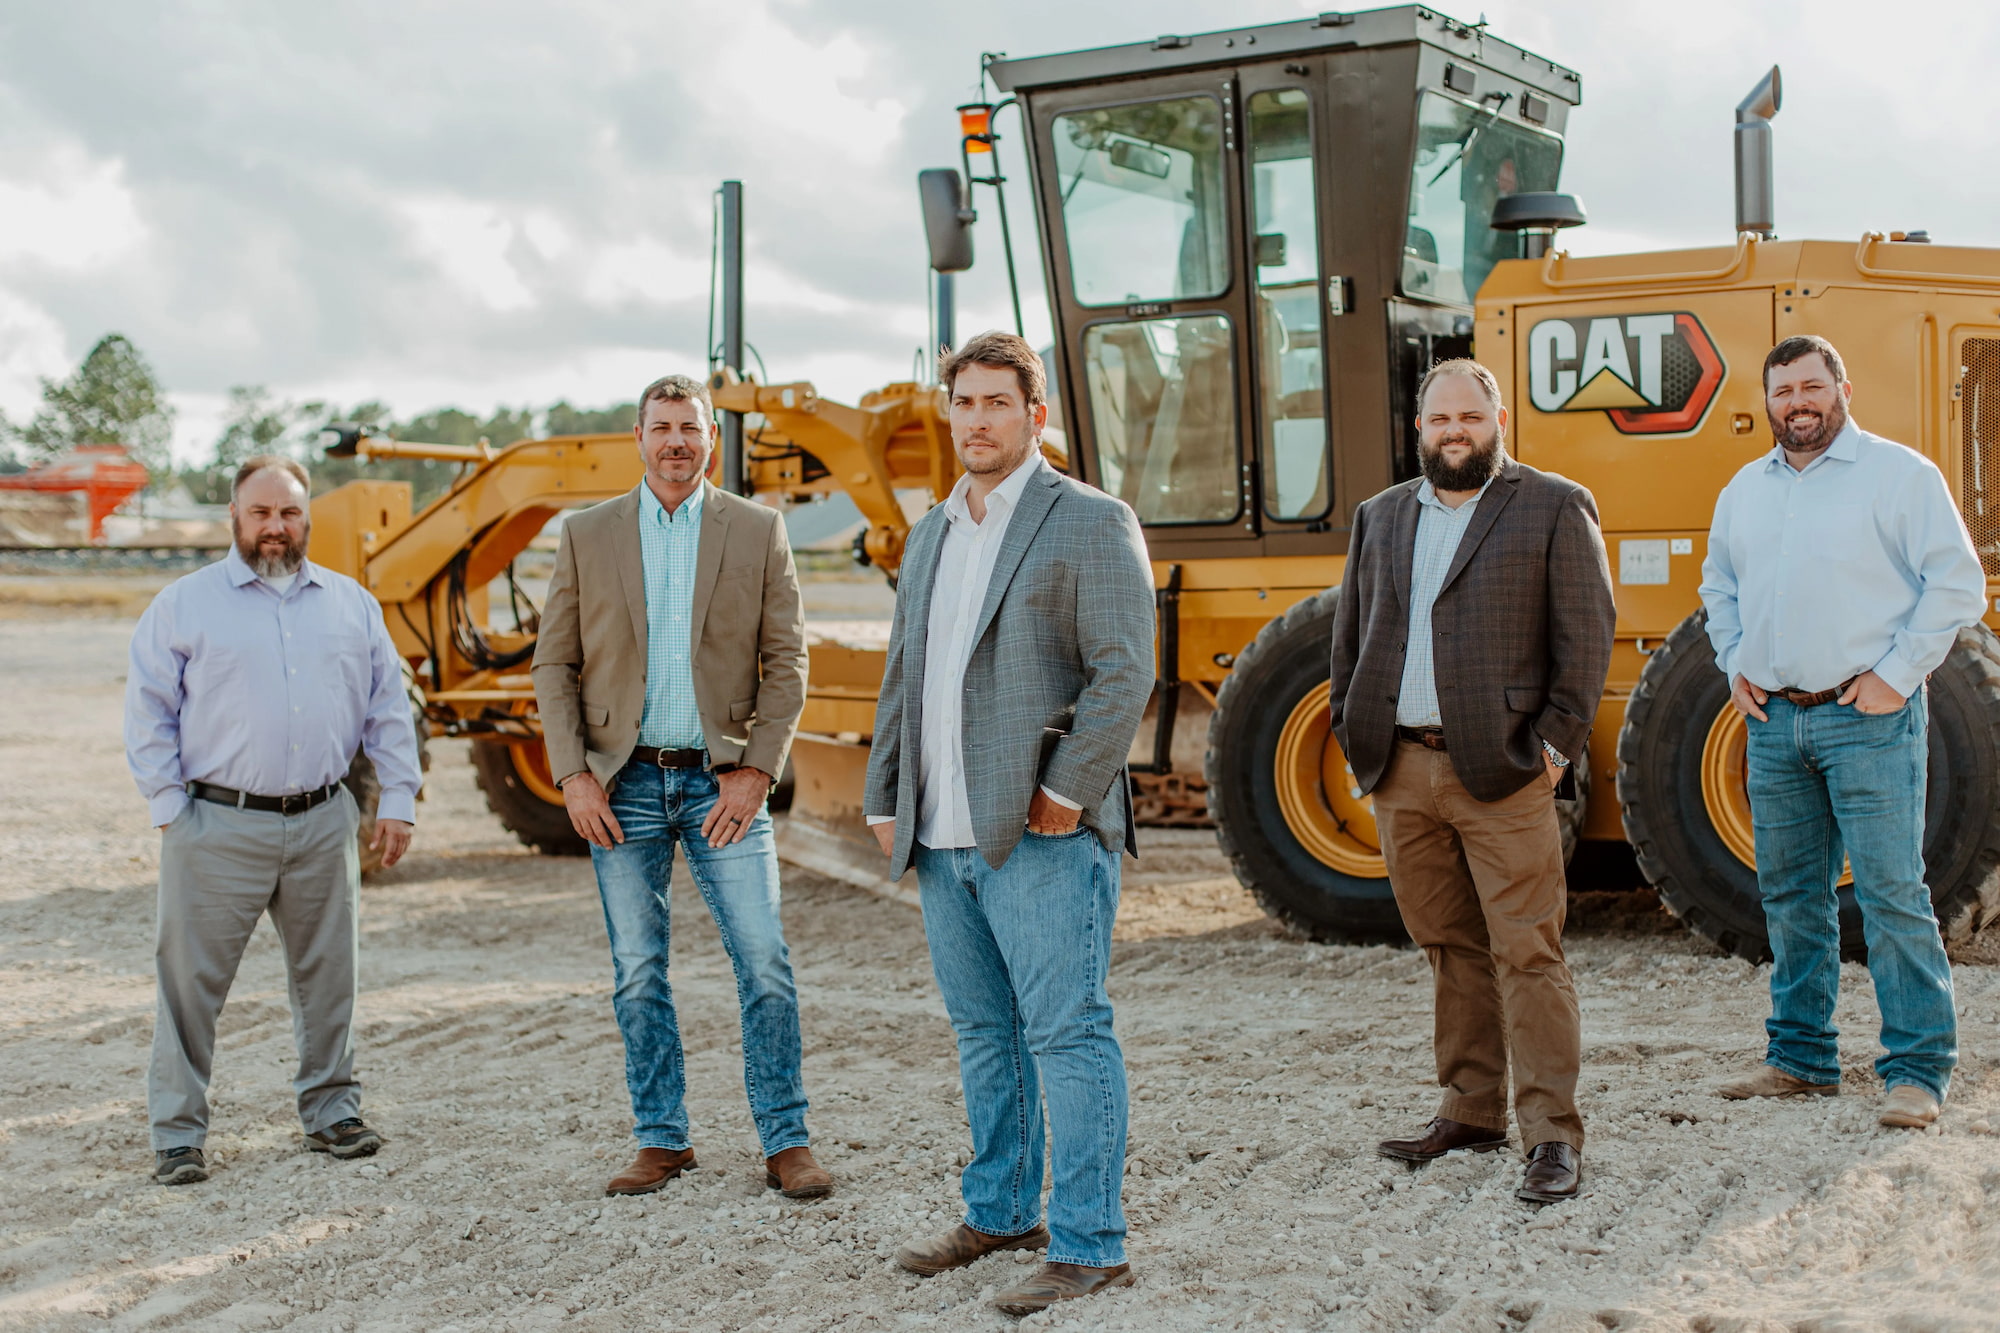 Patrick Davis stands with his employees in front of an excavator at Green Energy's headquarters in Holt, FL